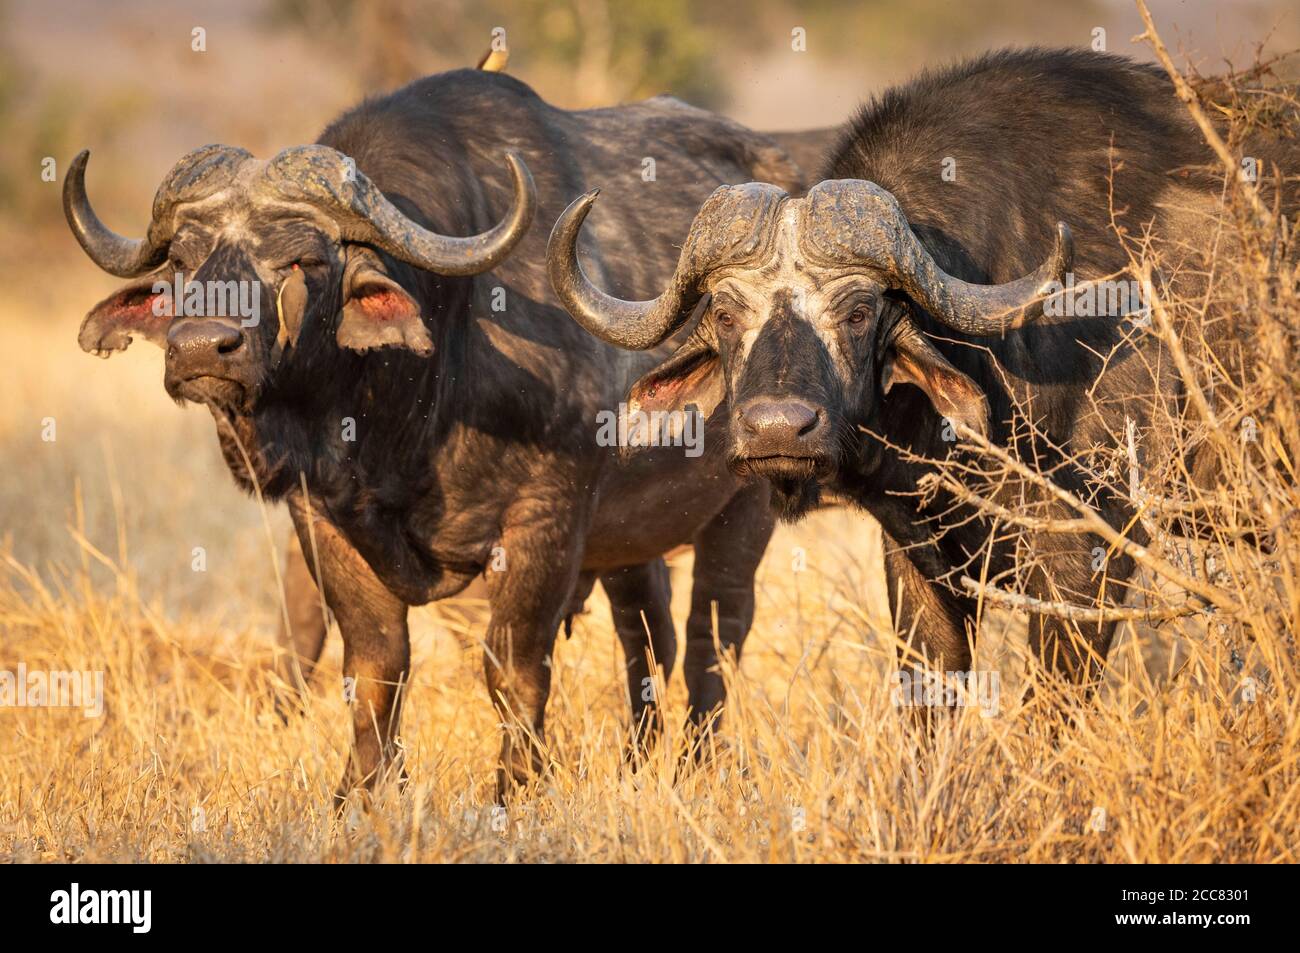 Two adult buffalo head on looking alert standing in tall yellow grass in Kruger Park South Africa Stock Photo